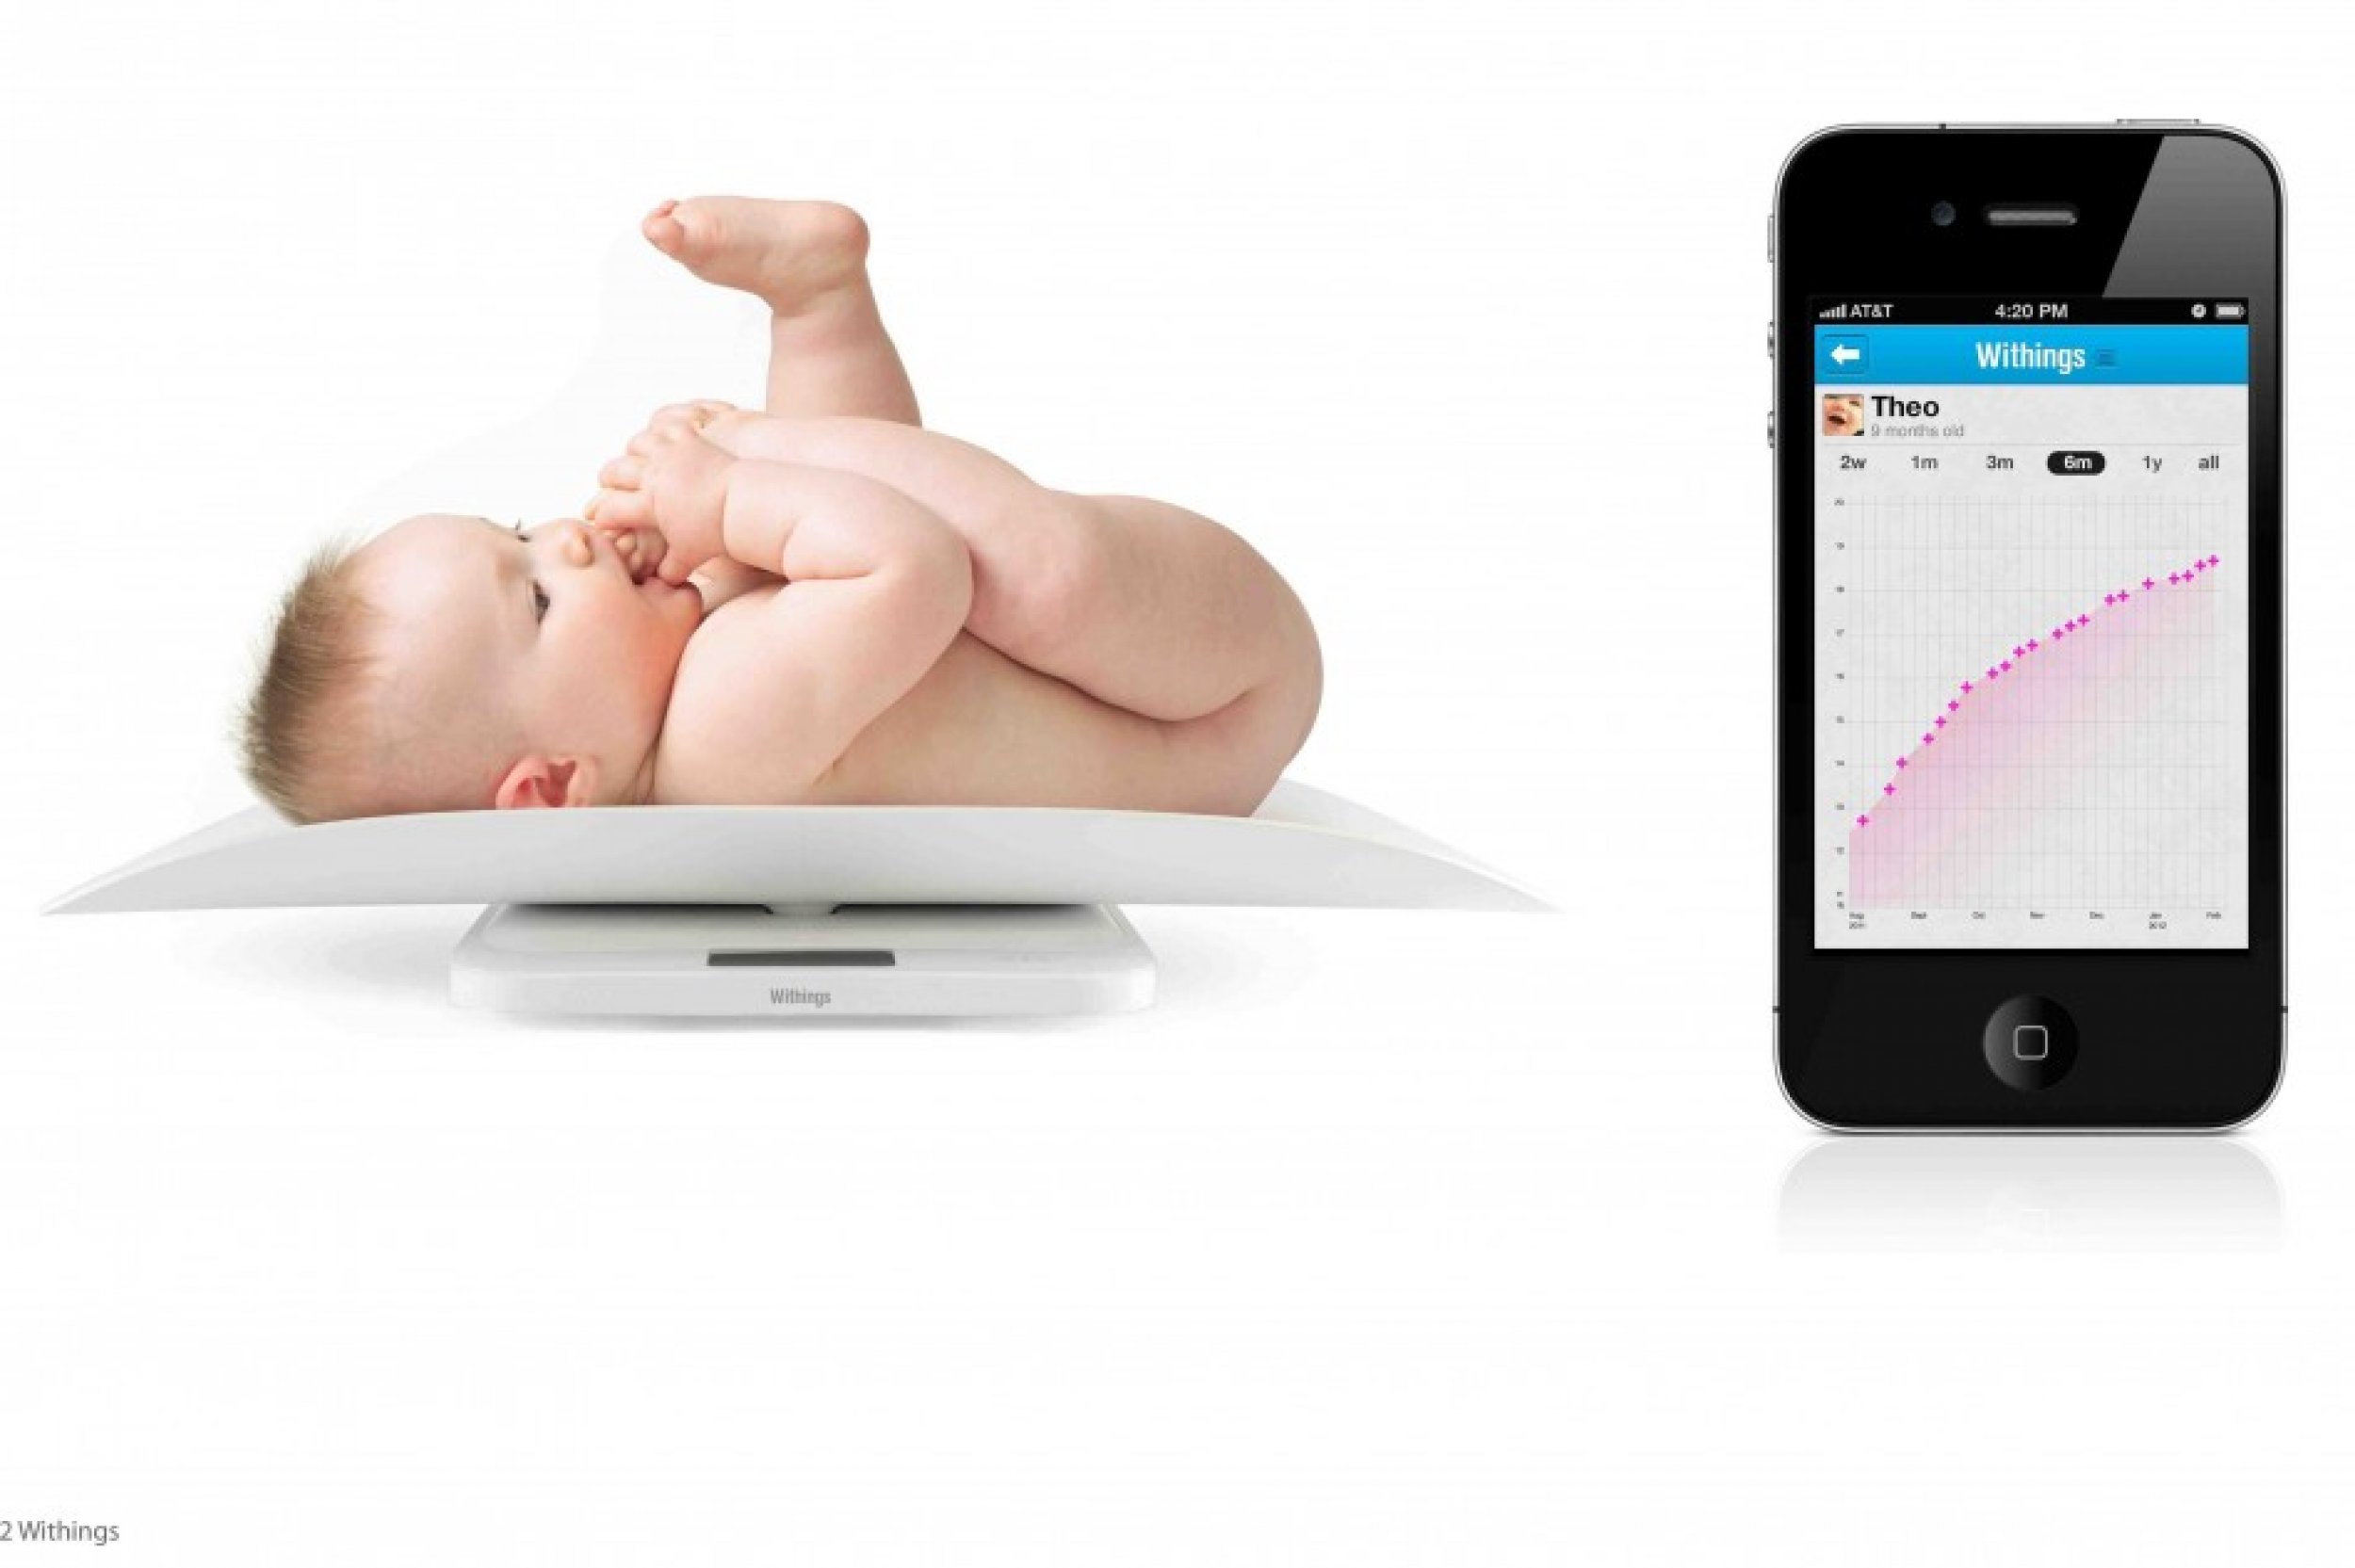 Withings debuted the world039s first Internet-connected baby and toddler scale at CES 2012 in Las Vegas. It records the weight and height of the child and wirelessly transmits the information to smartphones and computers to help parents keep track of t